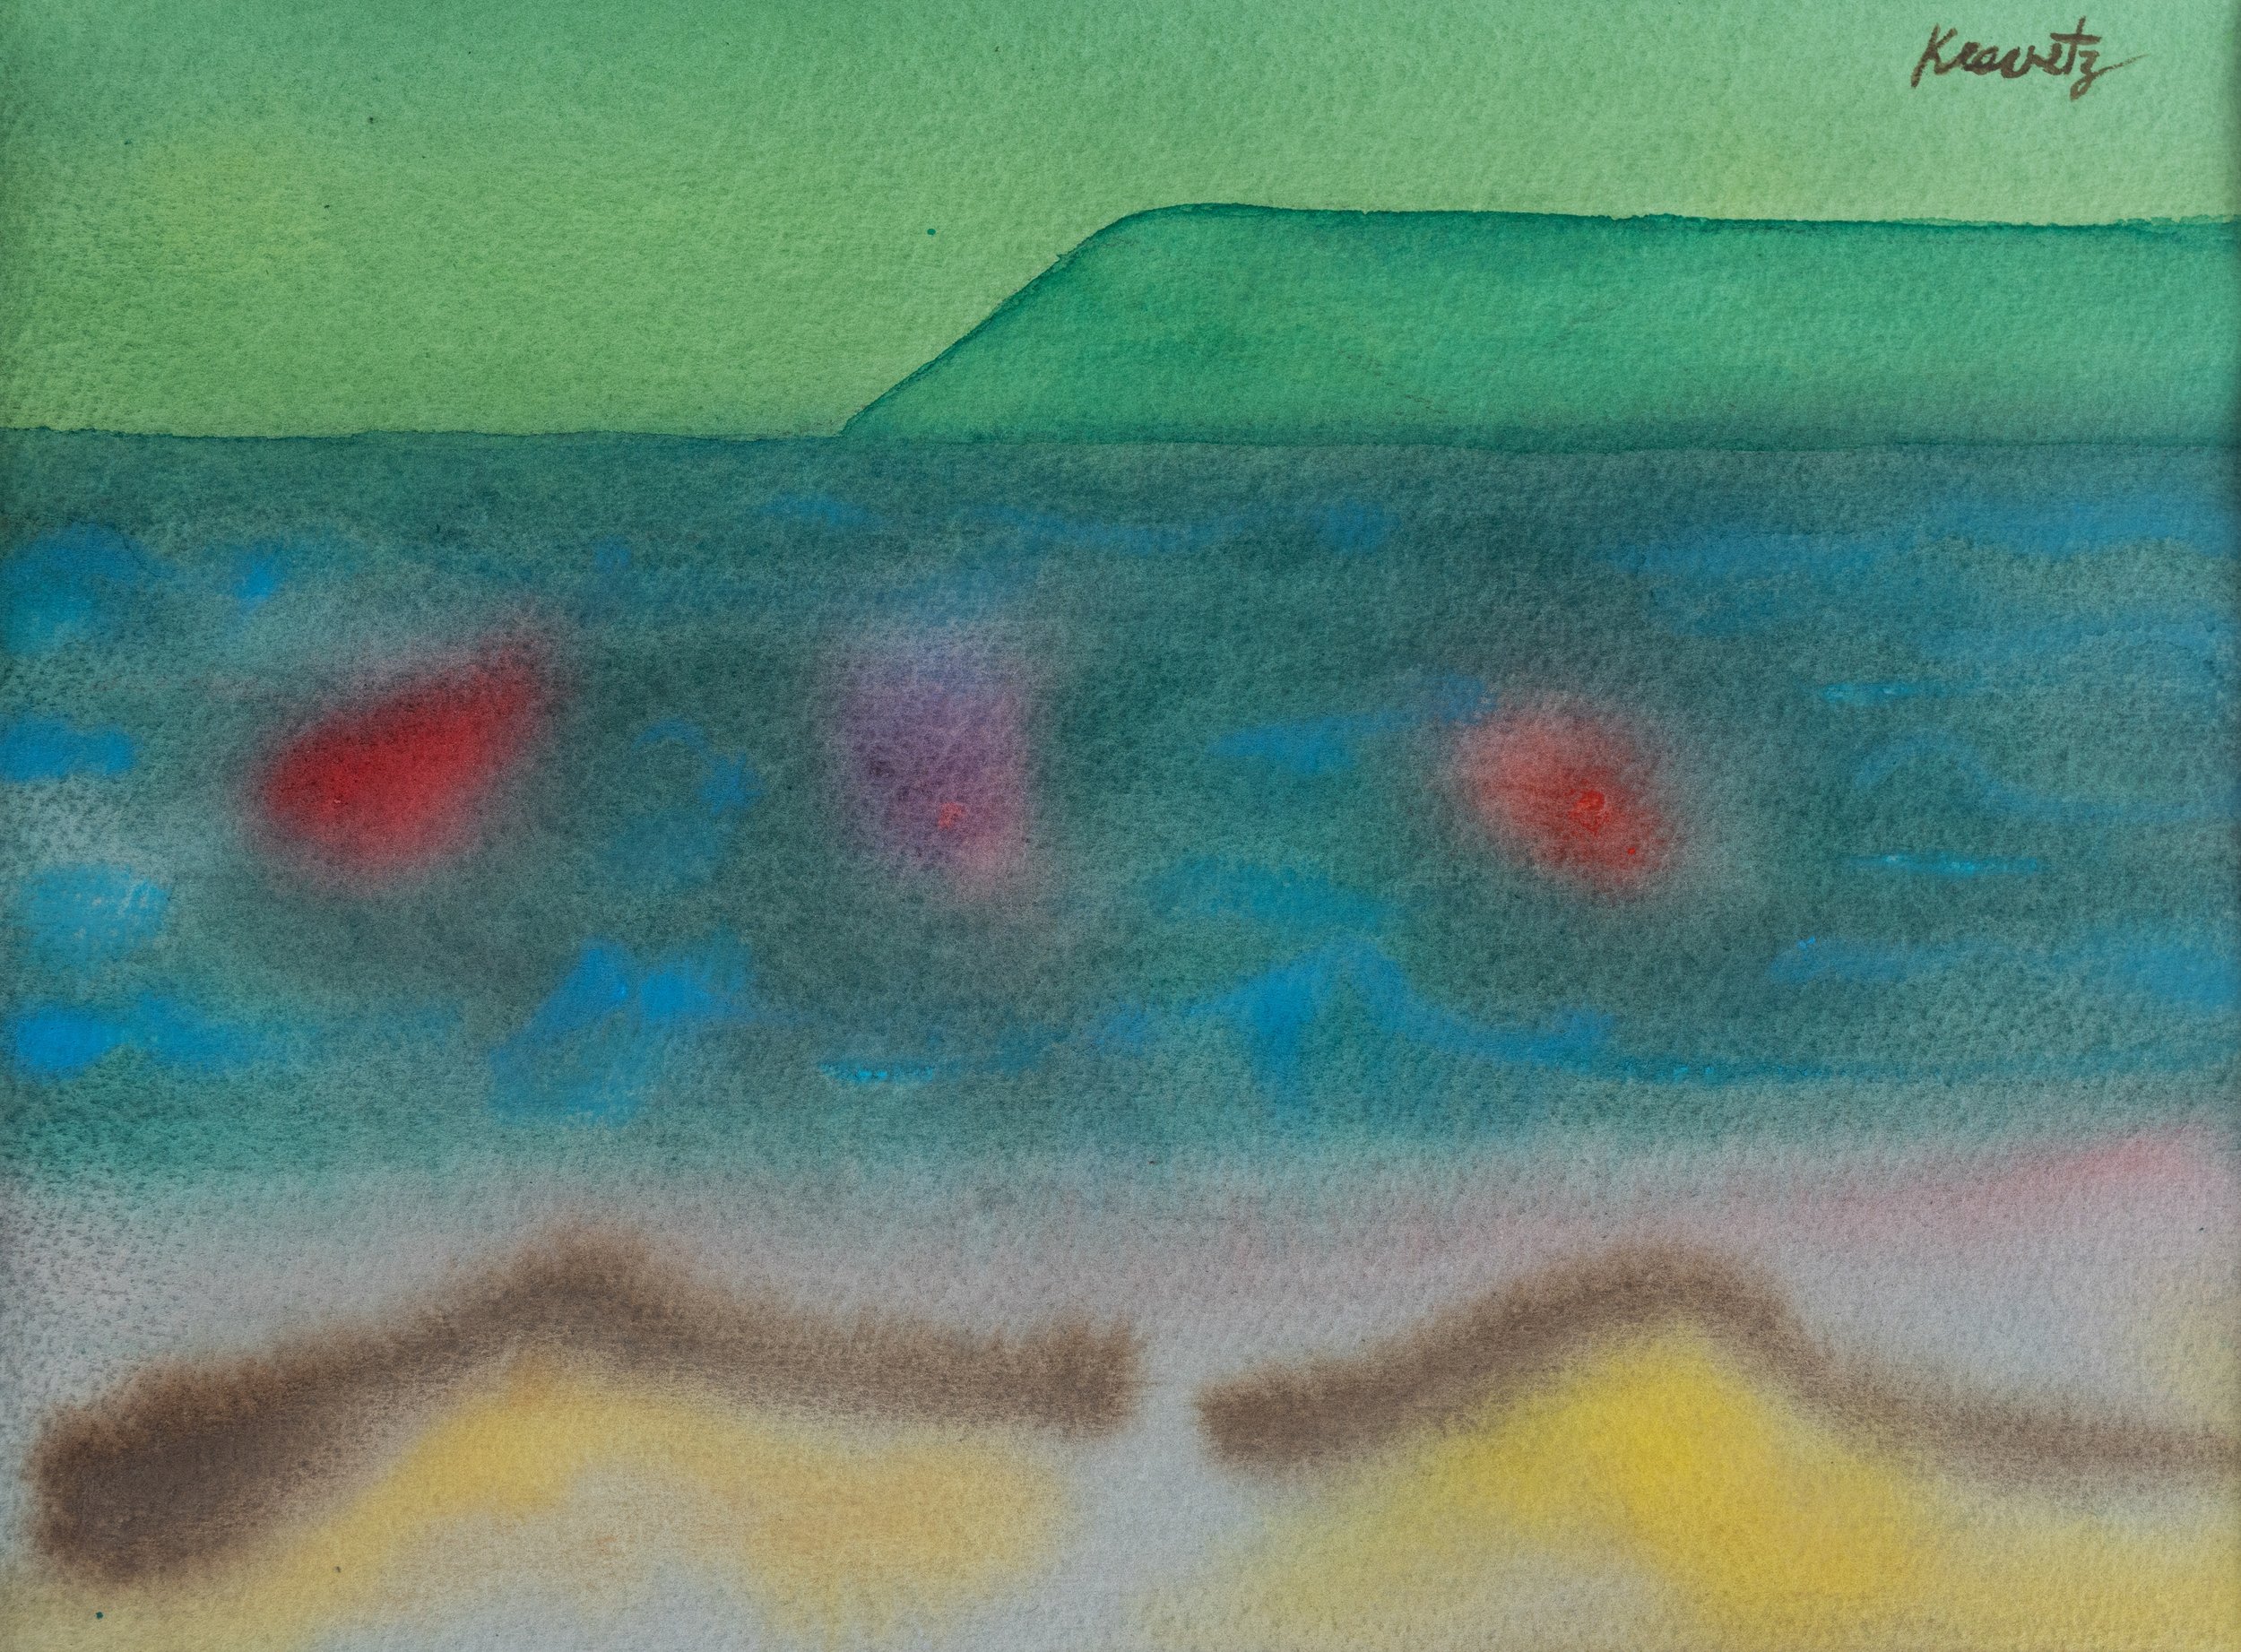 Sand, Sea and Point Loma, 1997, watercolor, 16x20 inches with mat